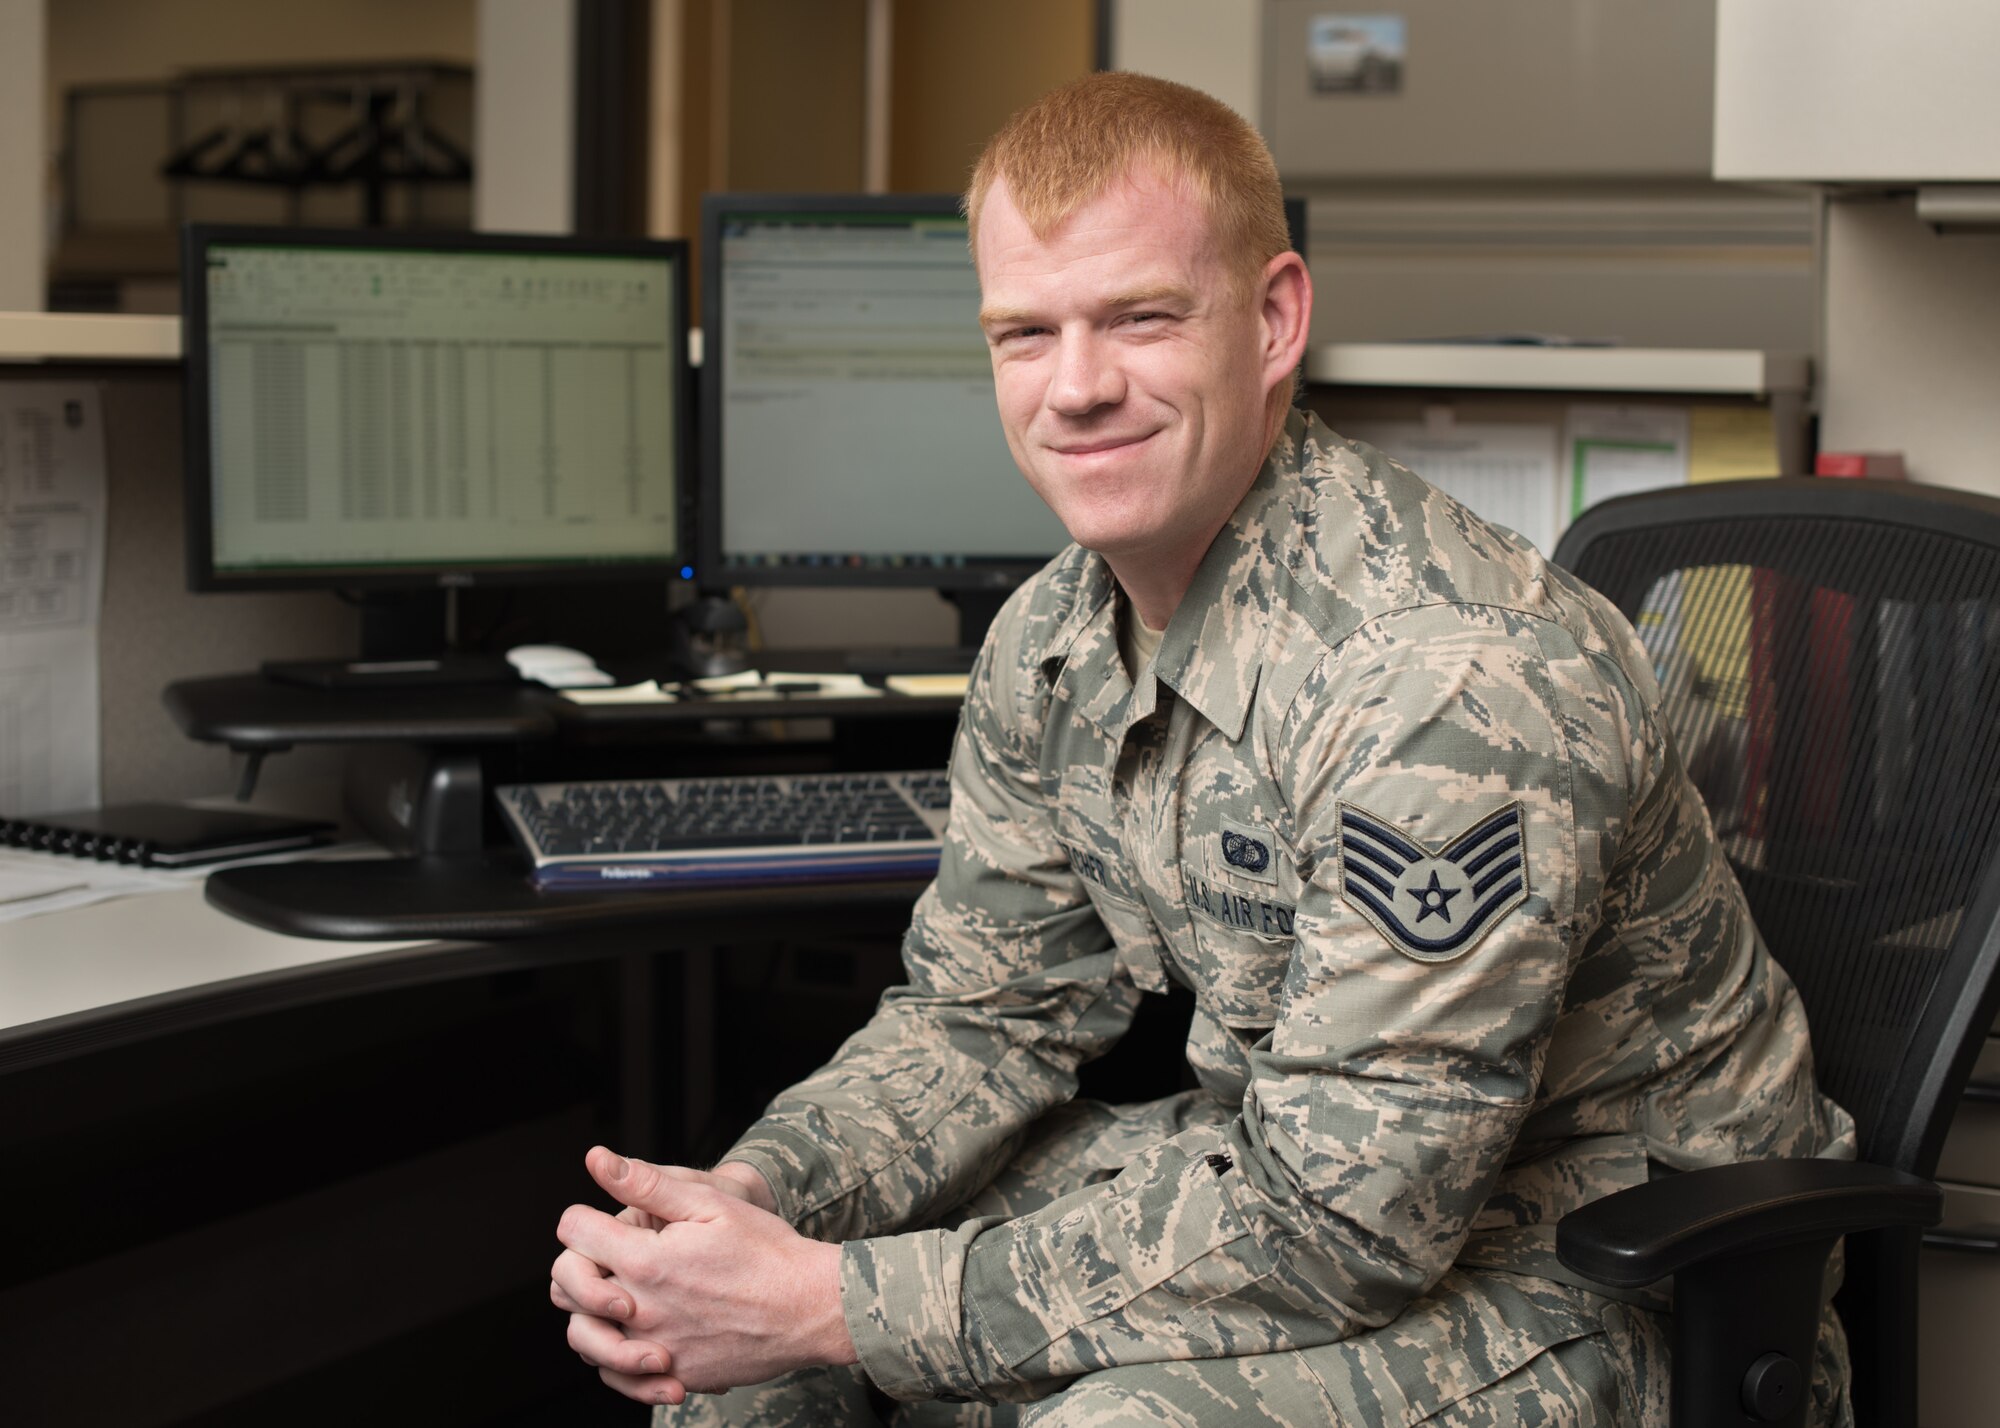 Staff Sgt. Kyle Fletcher, 349th Air Mobility Wing financial management specialist, knows that while his job requires a meticulous attention to detail that can become tedious, the results of his work impact people who count on his diligence. (U.S. Air Force photo by Ken Wright)